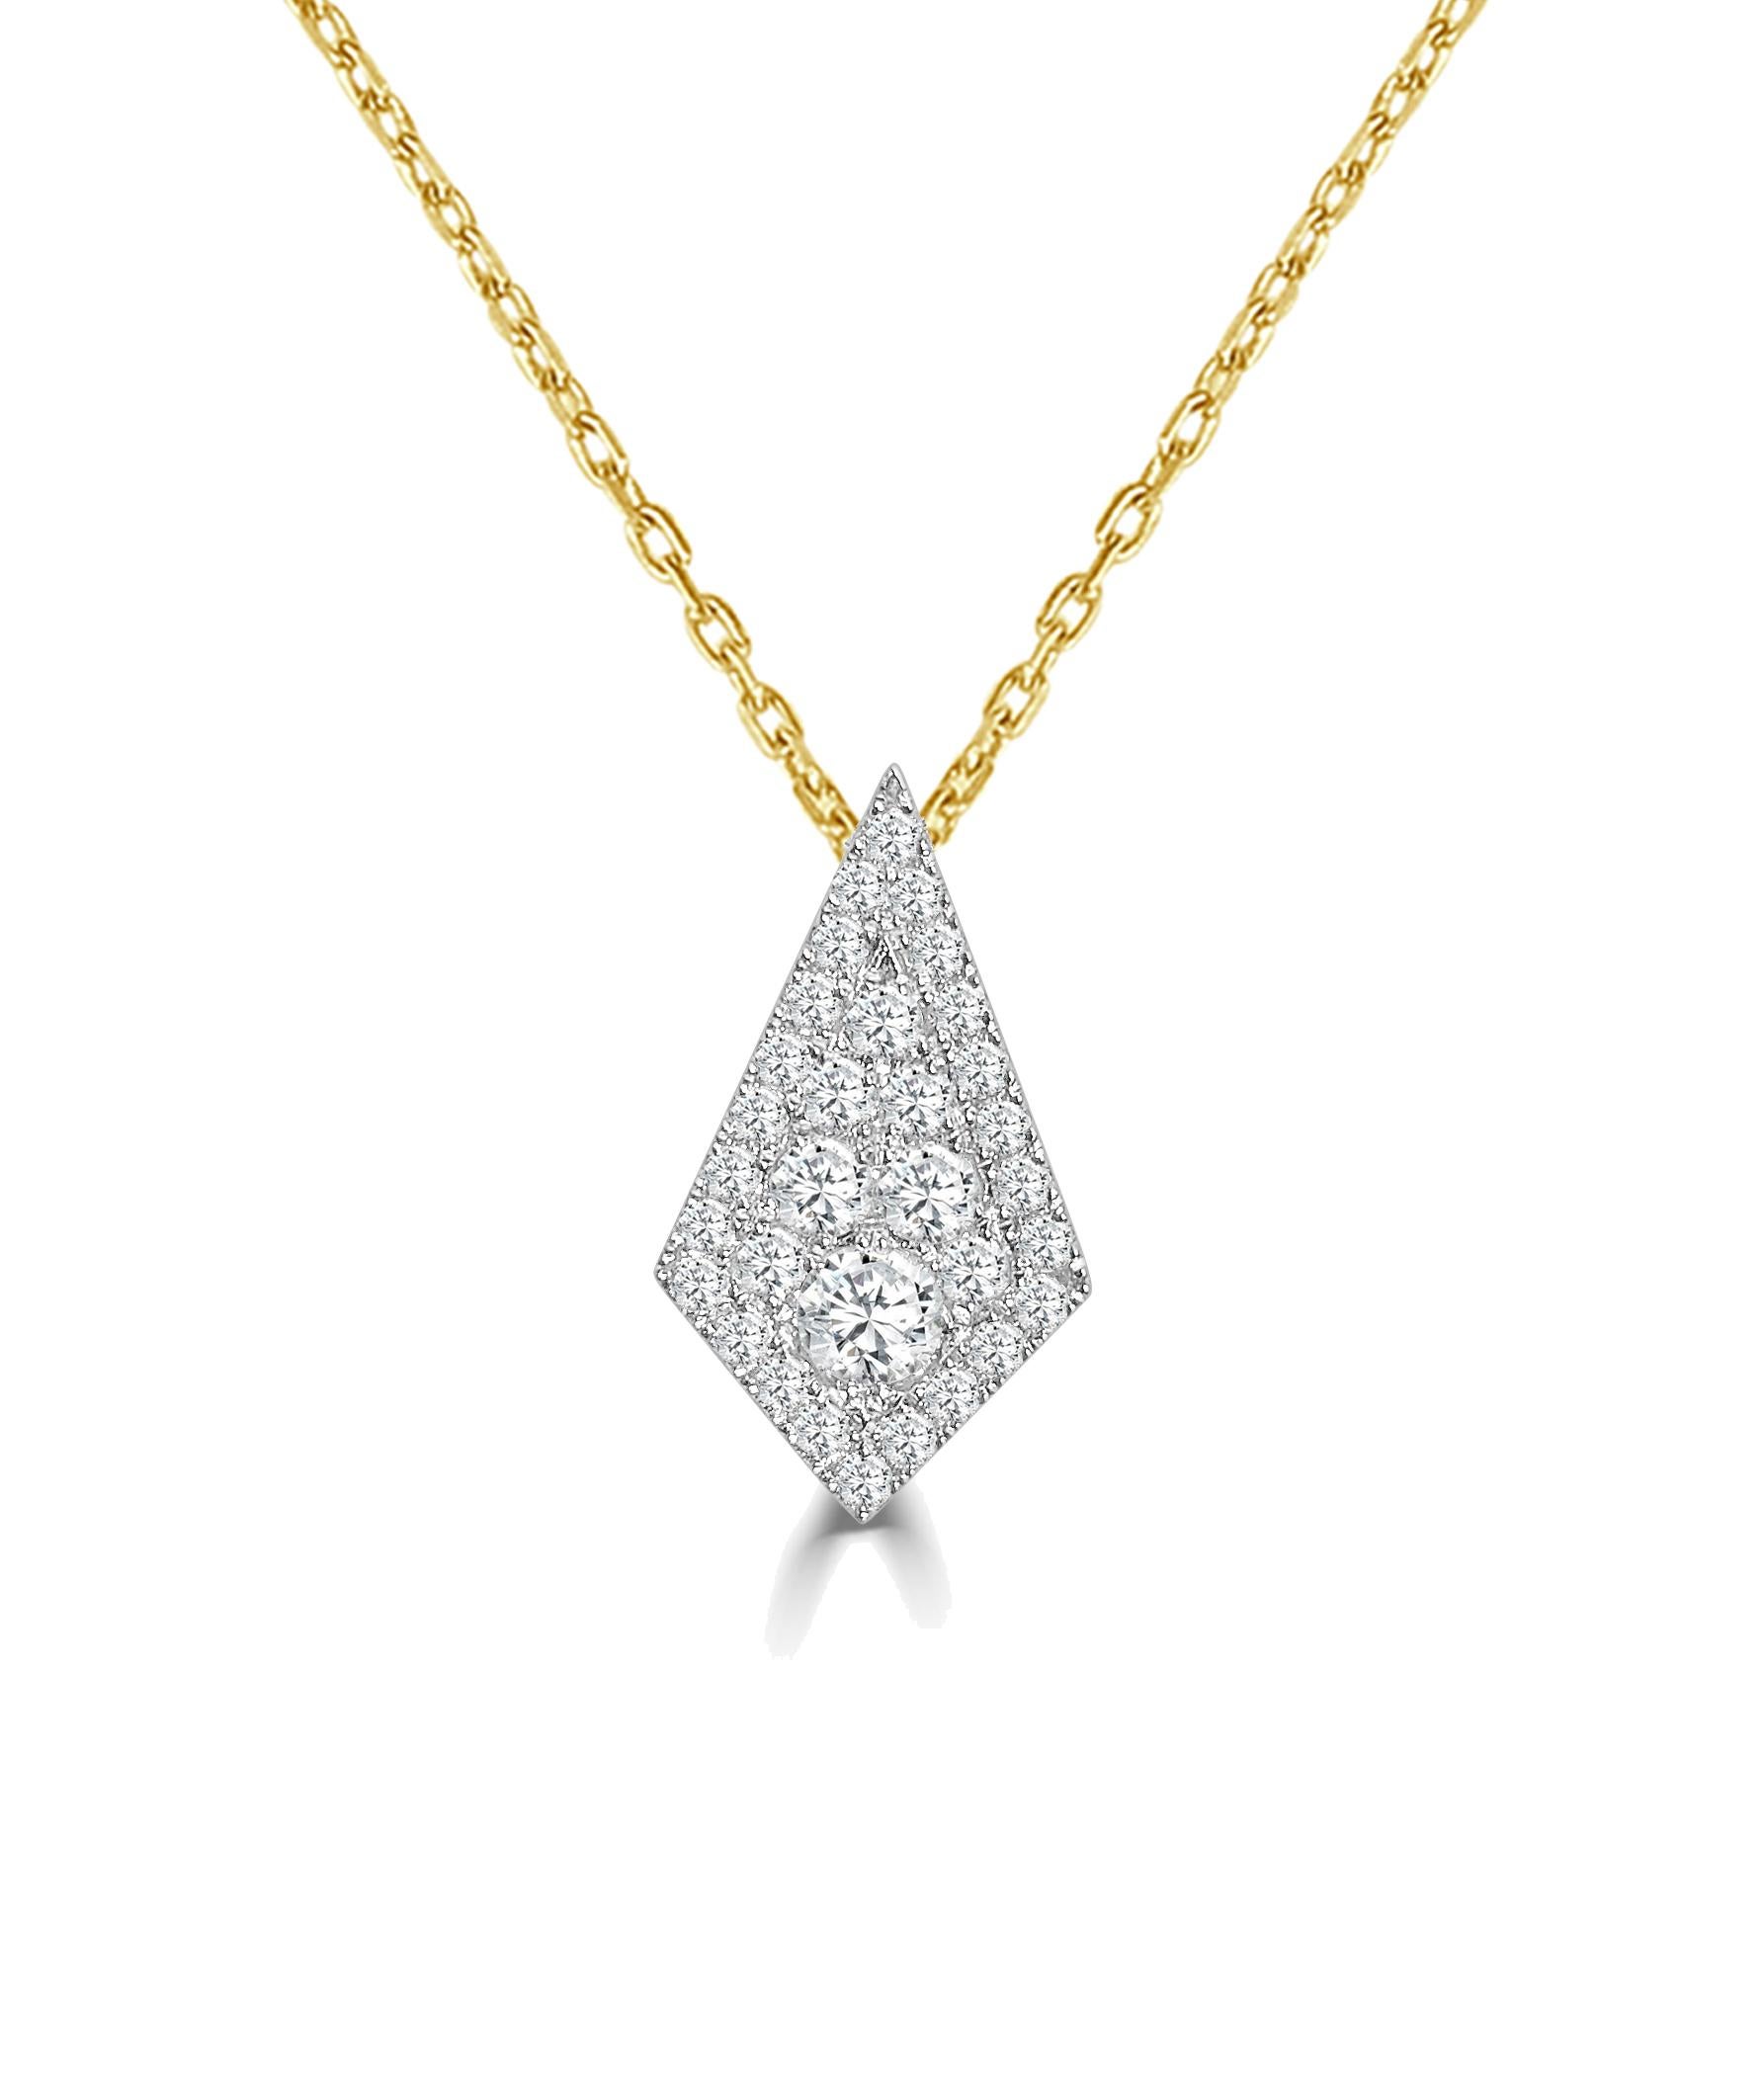 Extra Large Kite Shaped Firenze II Pendant With Chain, 0.89 Ct, Approximately 11 mm x 19.5 mm

Available in other metal/ gemstone options: This Diamond pendant can be made in white, pink or yellow gold. 
Matching earrings, bangle and ring available